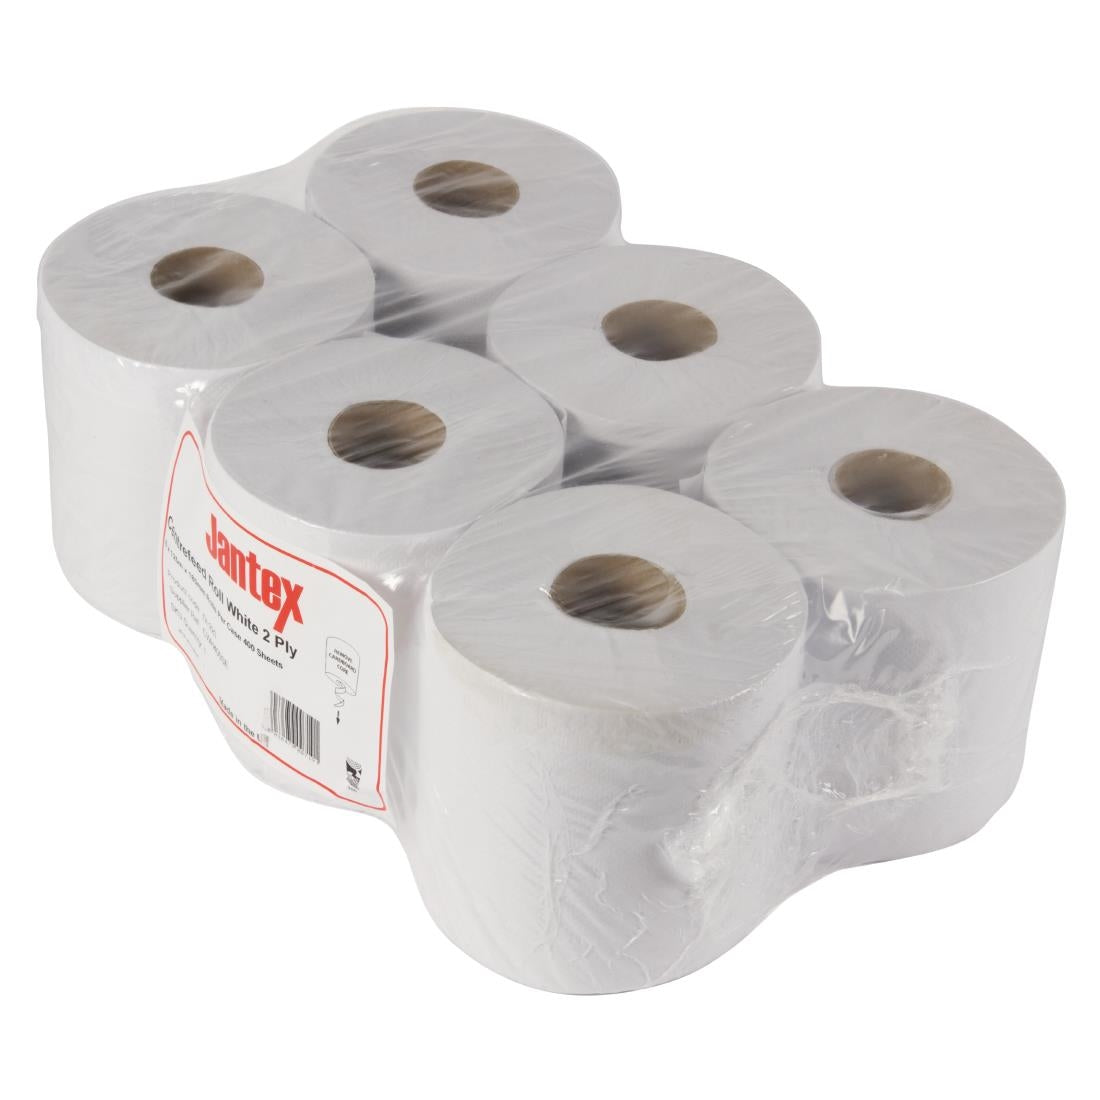 Jantex Centrefeed Rolls 2-Ply 120m (Pack of 6) JD Catering Equipment Solutions Ltd